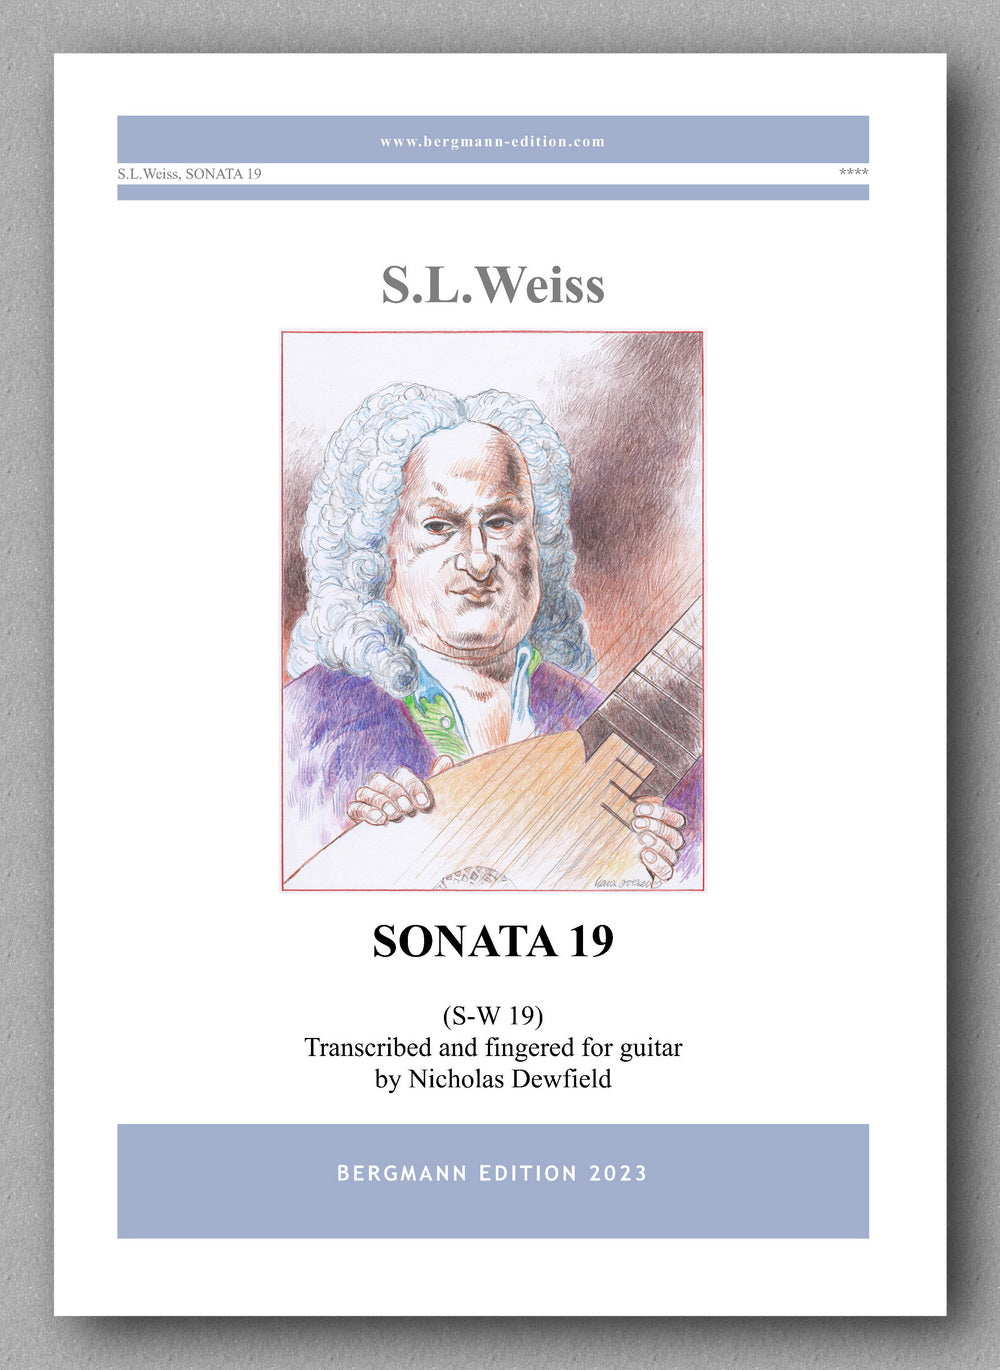 Sylvius Leopold Weiss (1687-1750), Sonata No. 19 - preview of the cover